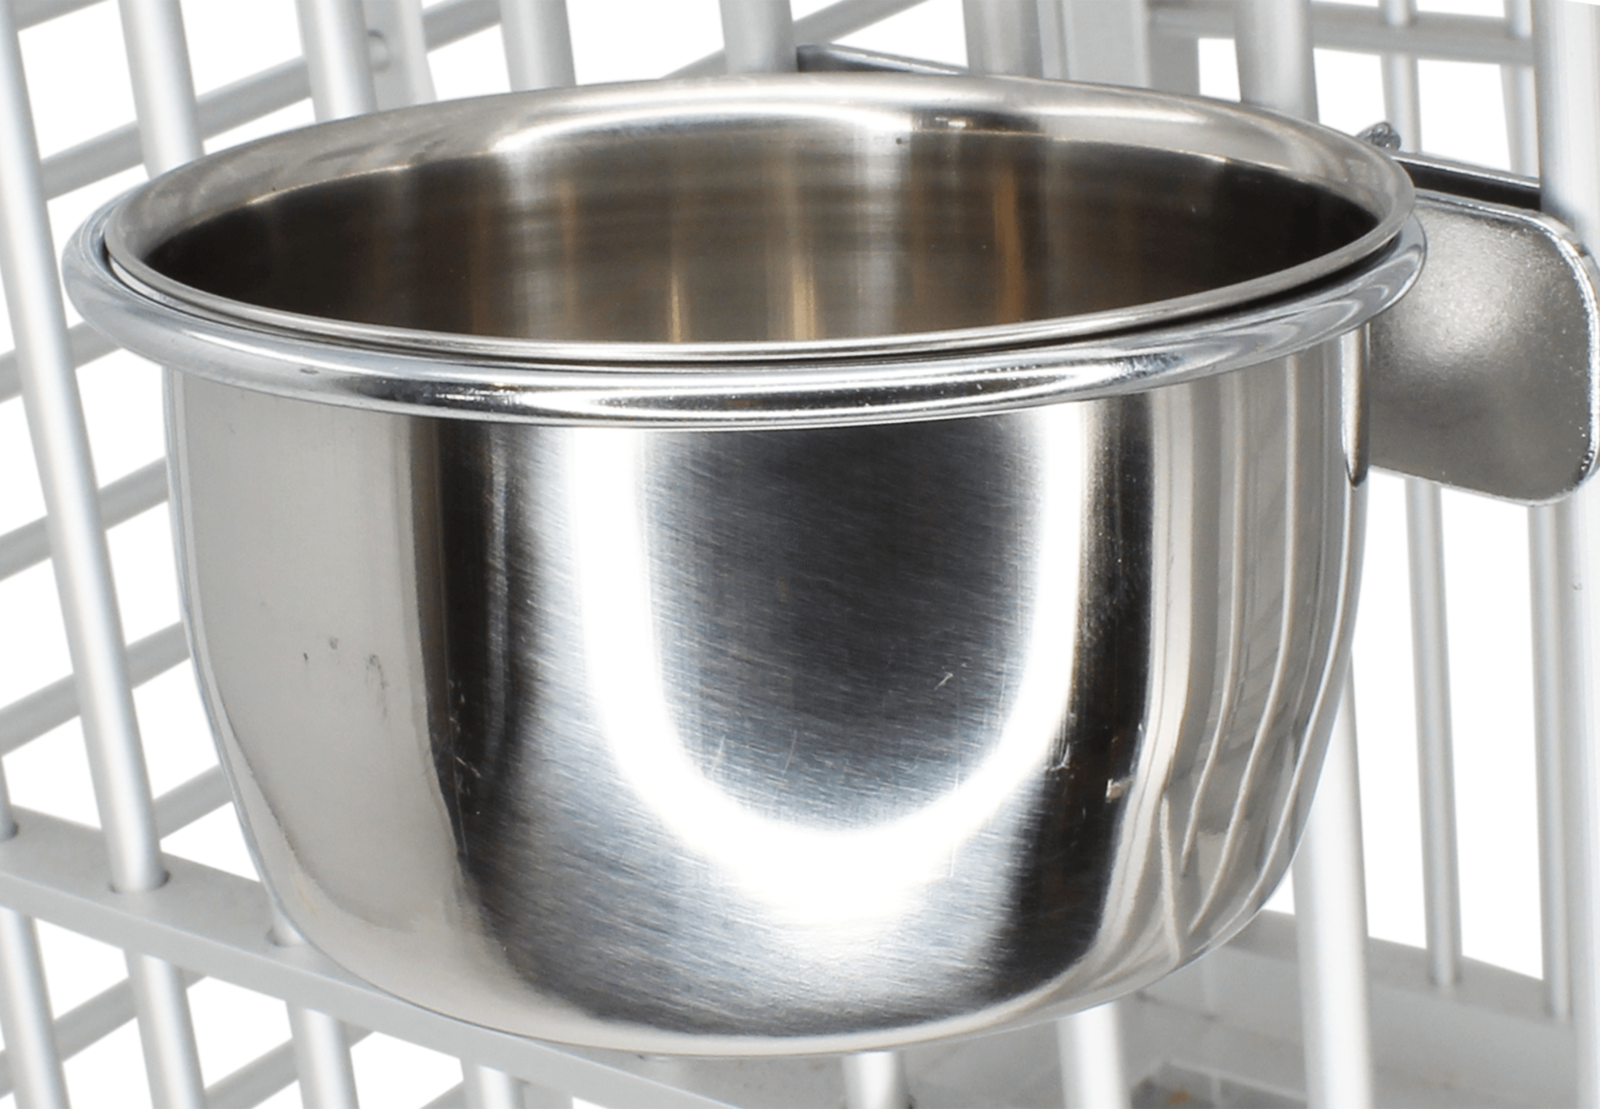 800120 Stainless Steel 5 Oz Cage Coop Clamp Bolt Cup Bird Dog Food Water Bowl